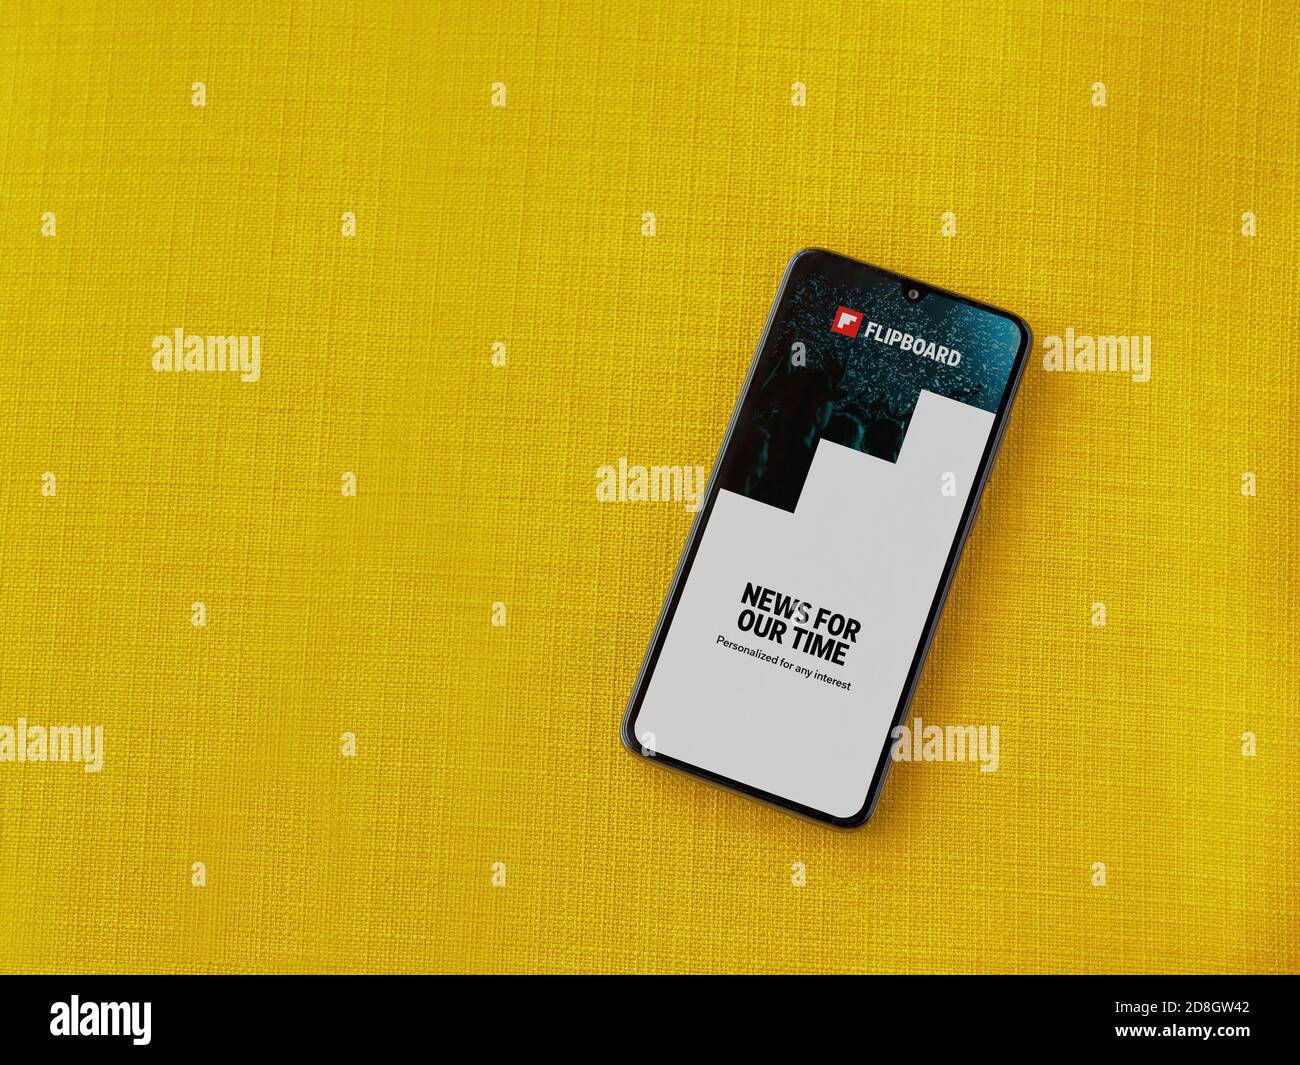 Lod, Israel - July 8, 2020: Flipboard app launch screen with logo on the display of a black mobile smartphone on a yellow fabric background. Top view Stock Photo